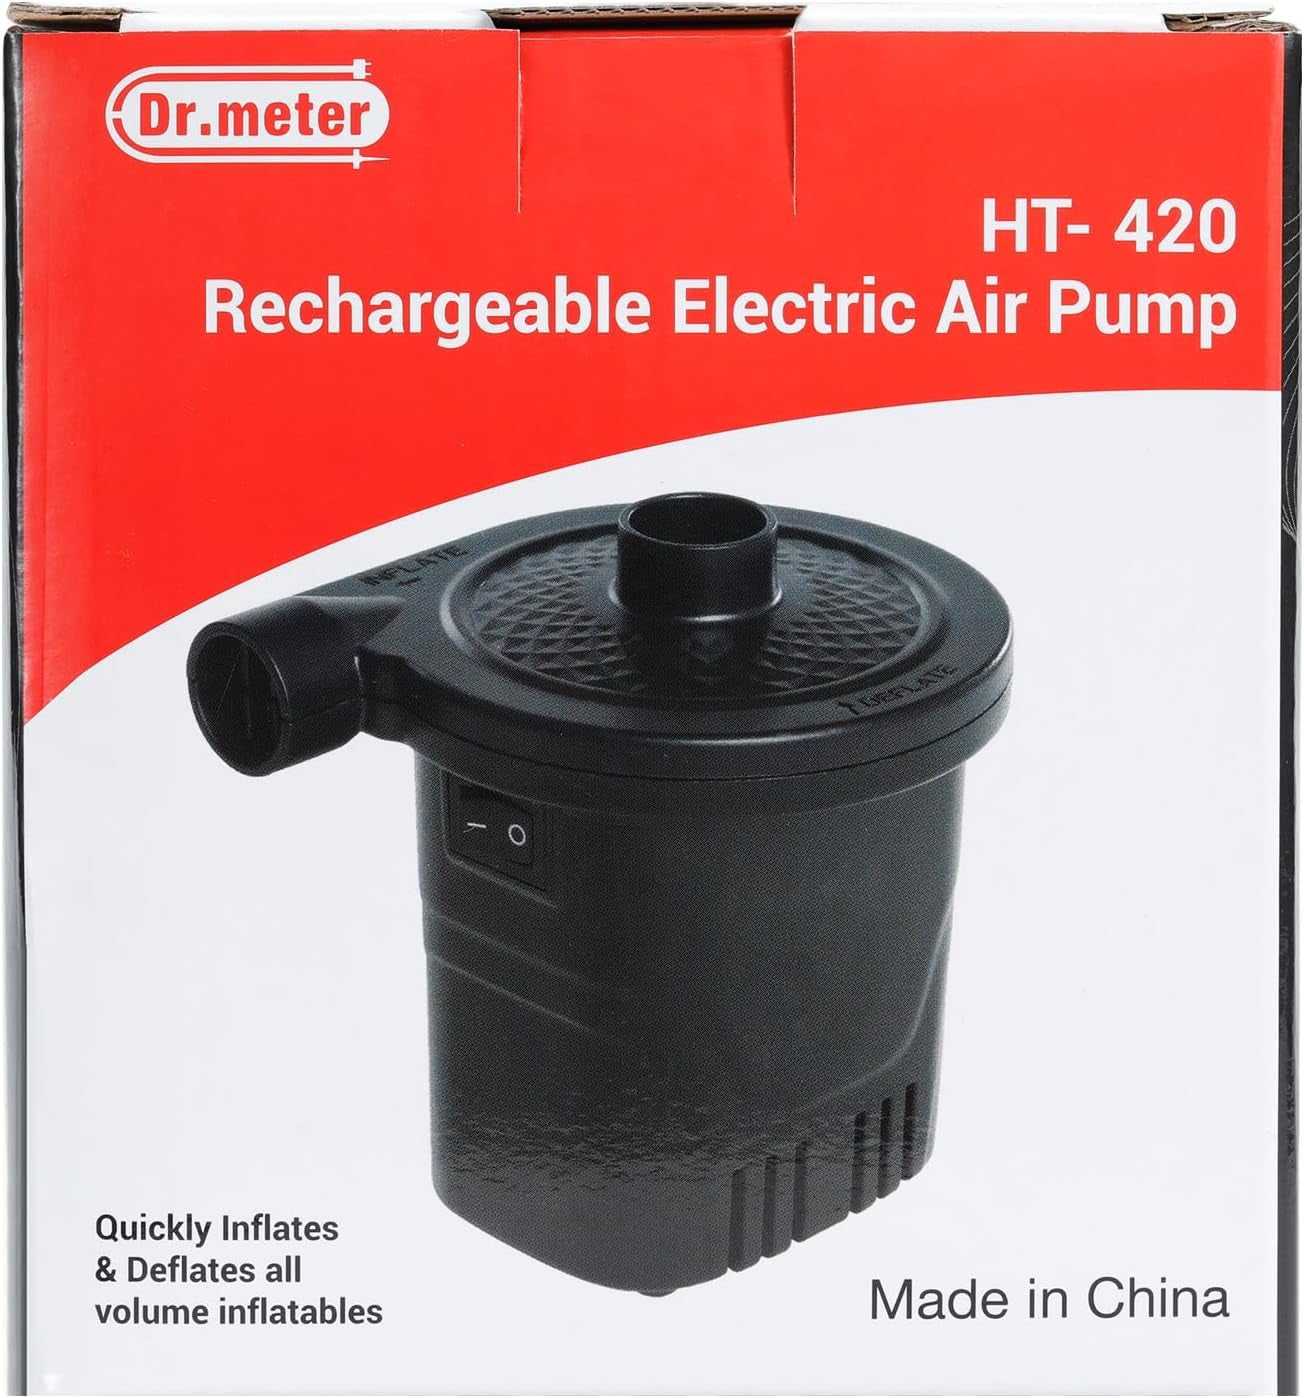 Electric Air Pump for Inflatables: Rechargeable 4000Mah Battery Air Mattress Pump -  Portable Quick-Fill Inflator Deflator for Outdoor Camping Bed Pool Boat Float Raft Yoga Balls Snow Tube